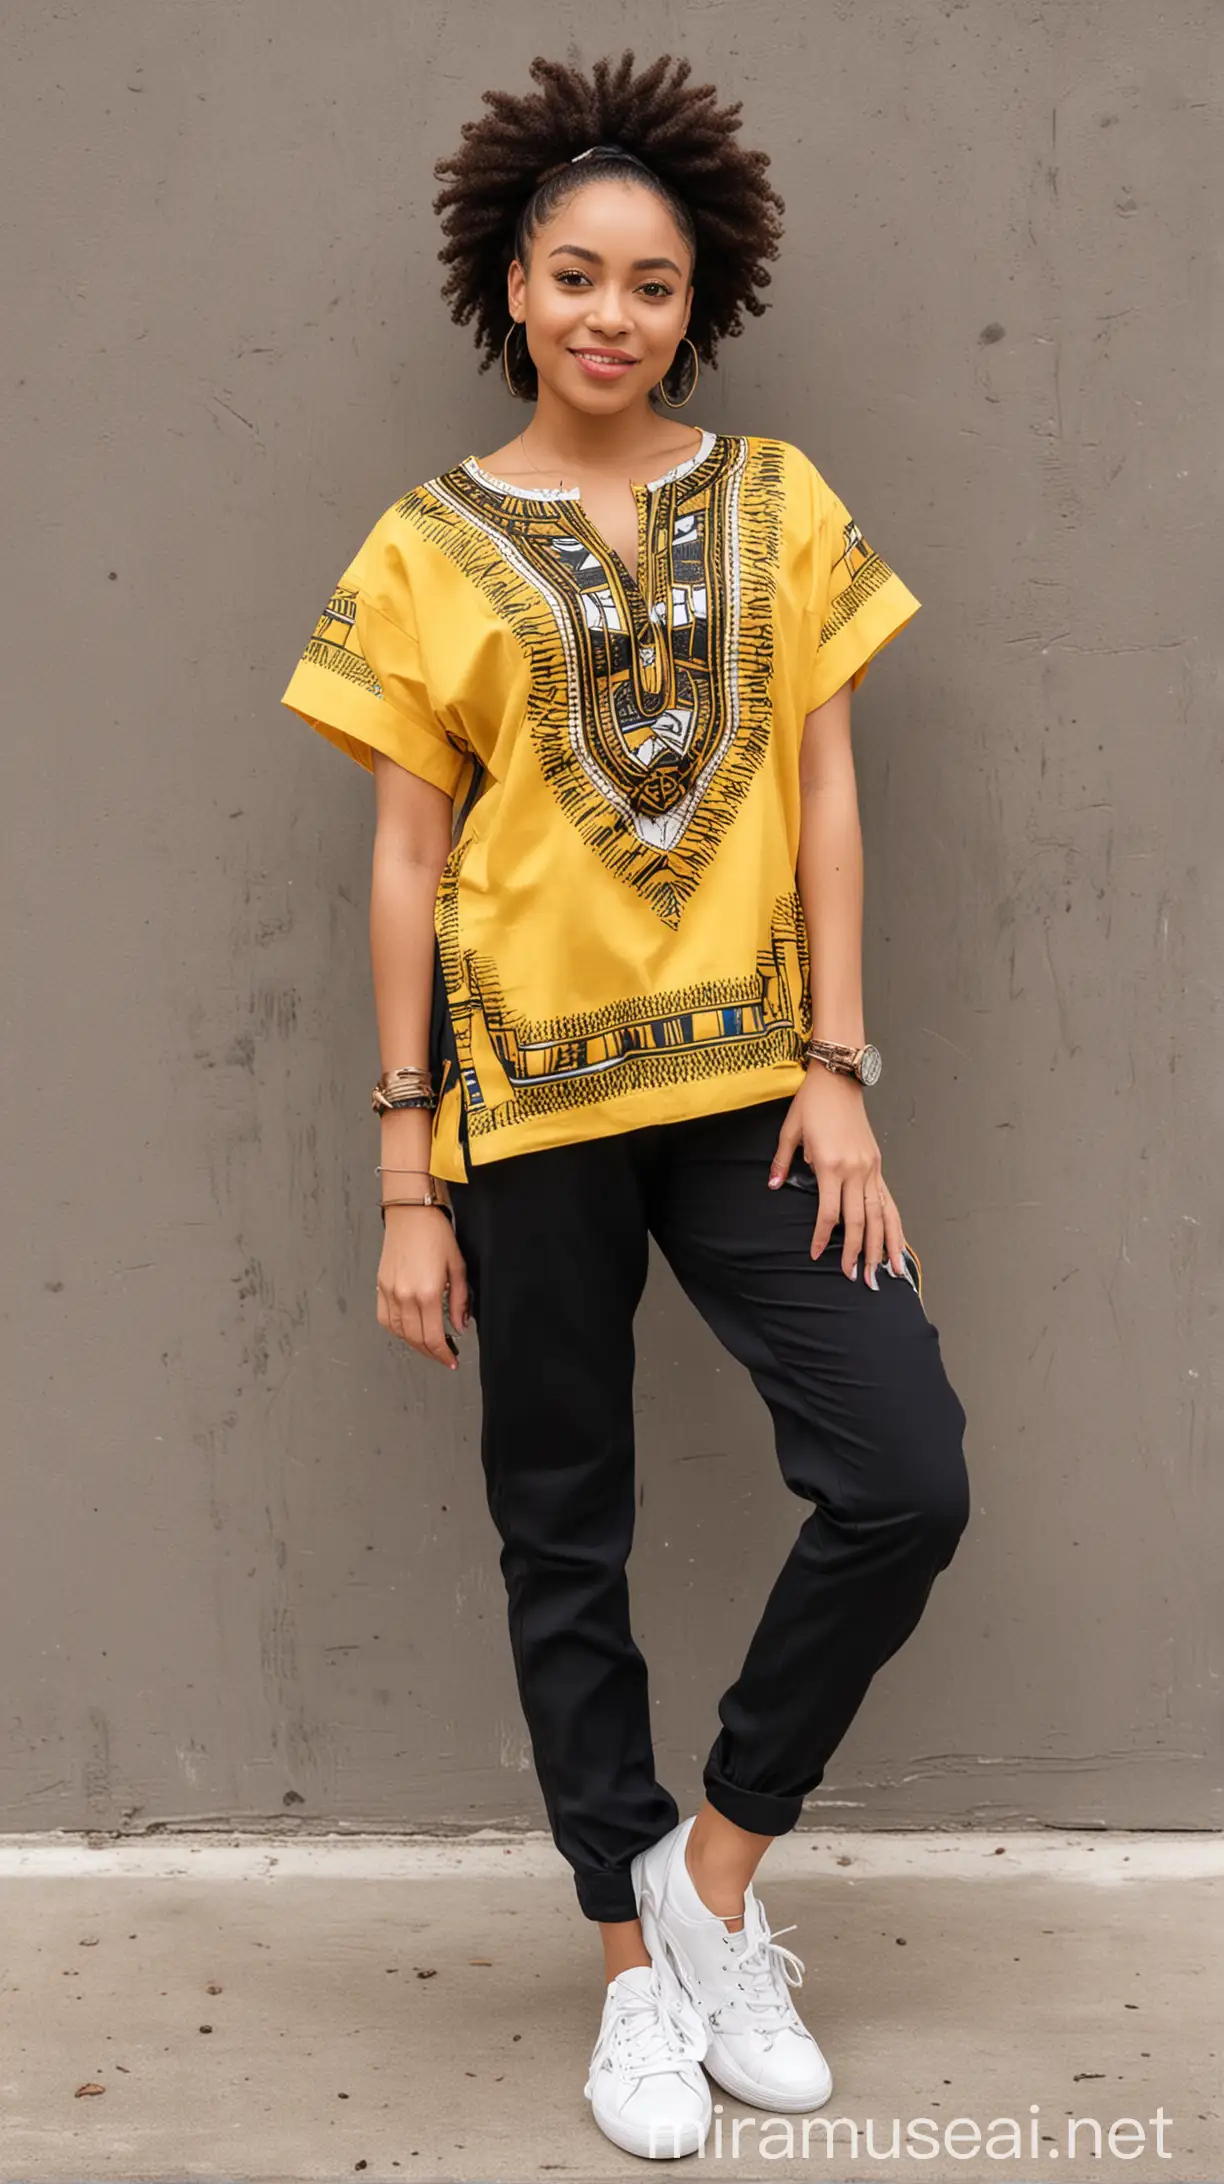 African light skinned woman wearing plain yellow Dashiki shirt and black Pants and white sneakers